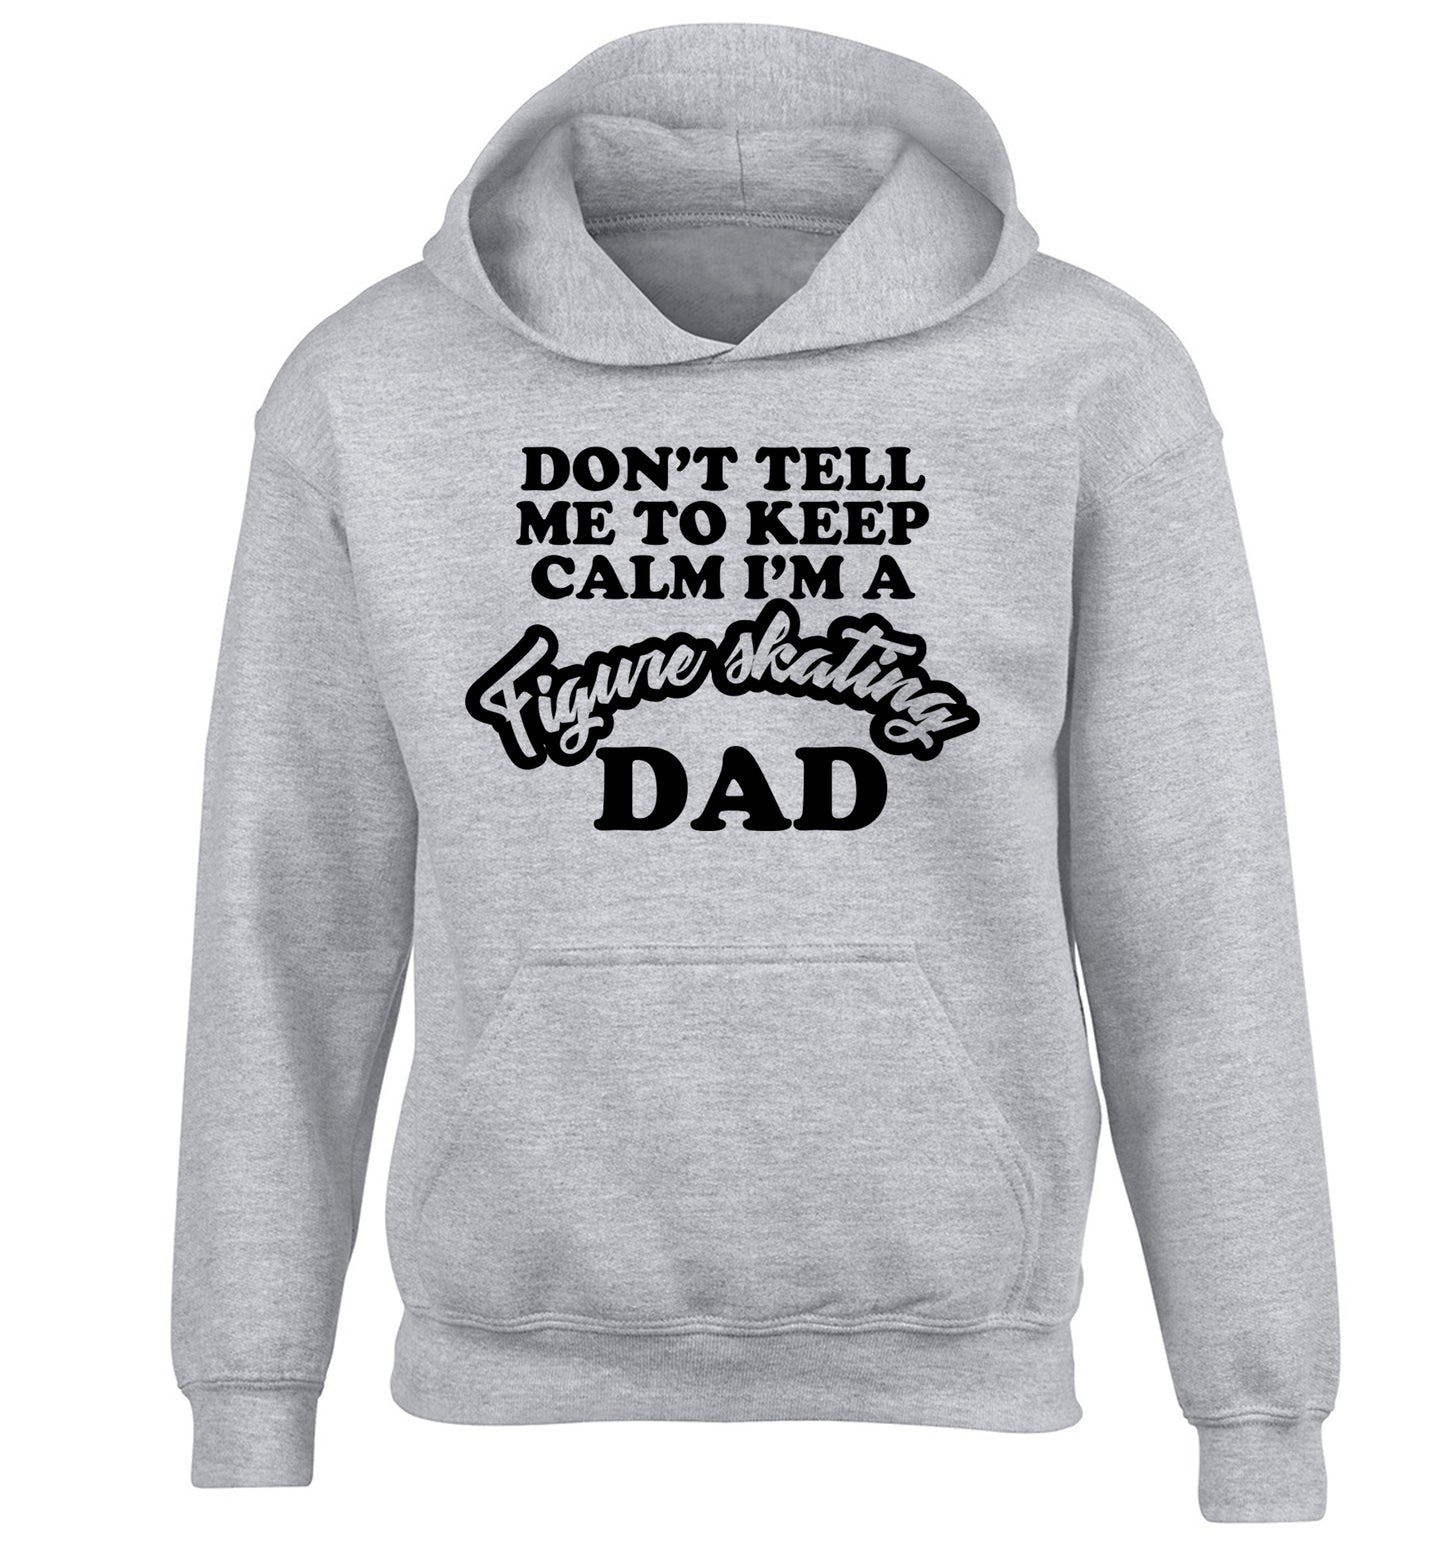 Don't tell me to keep calm I'm a figure skating dad children's grey hoodie 12-14 Years